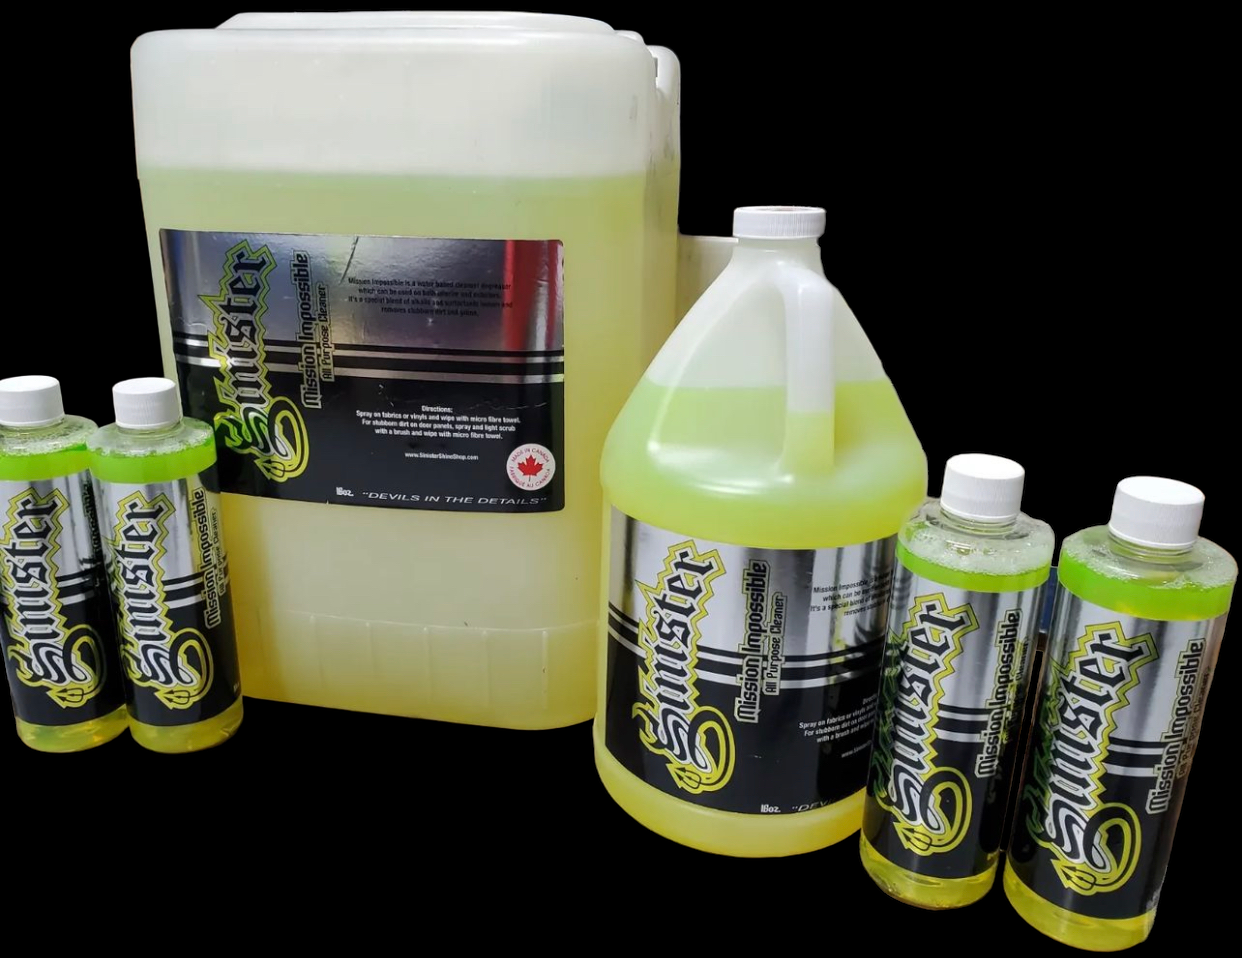 Sinister Xtreme Touchless Truck Wash Soap 1 GAL JUG